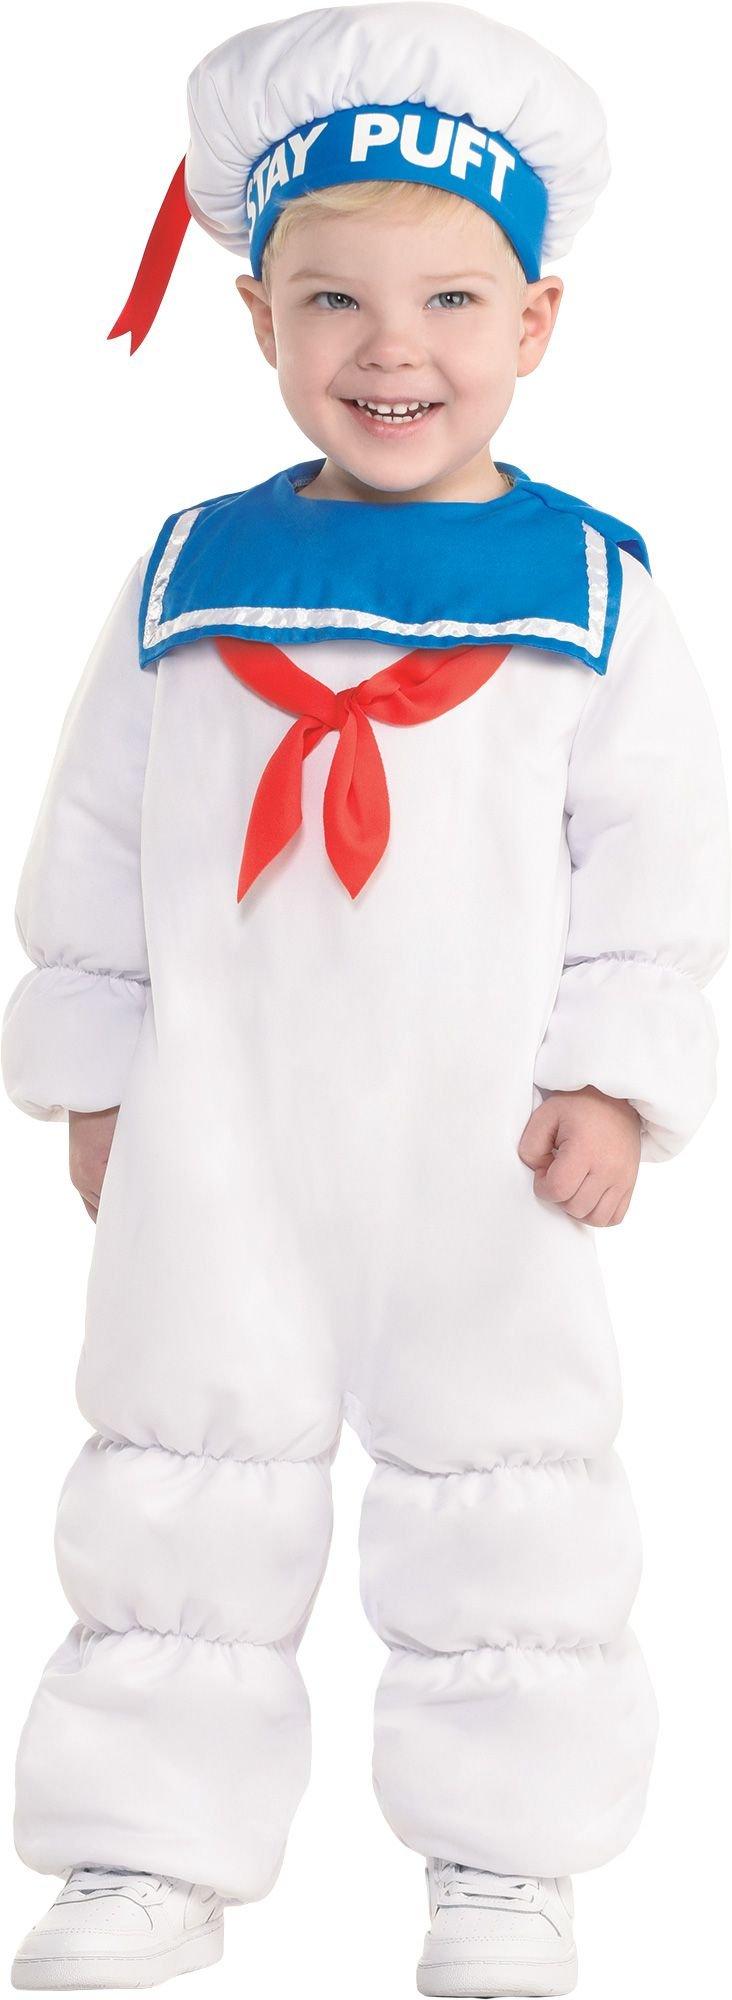 stay puft marshmallow man costume party city